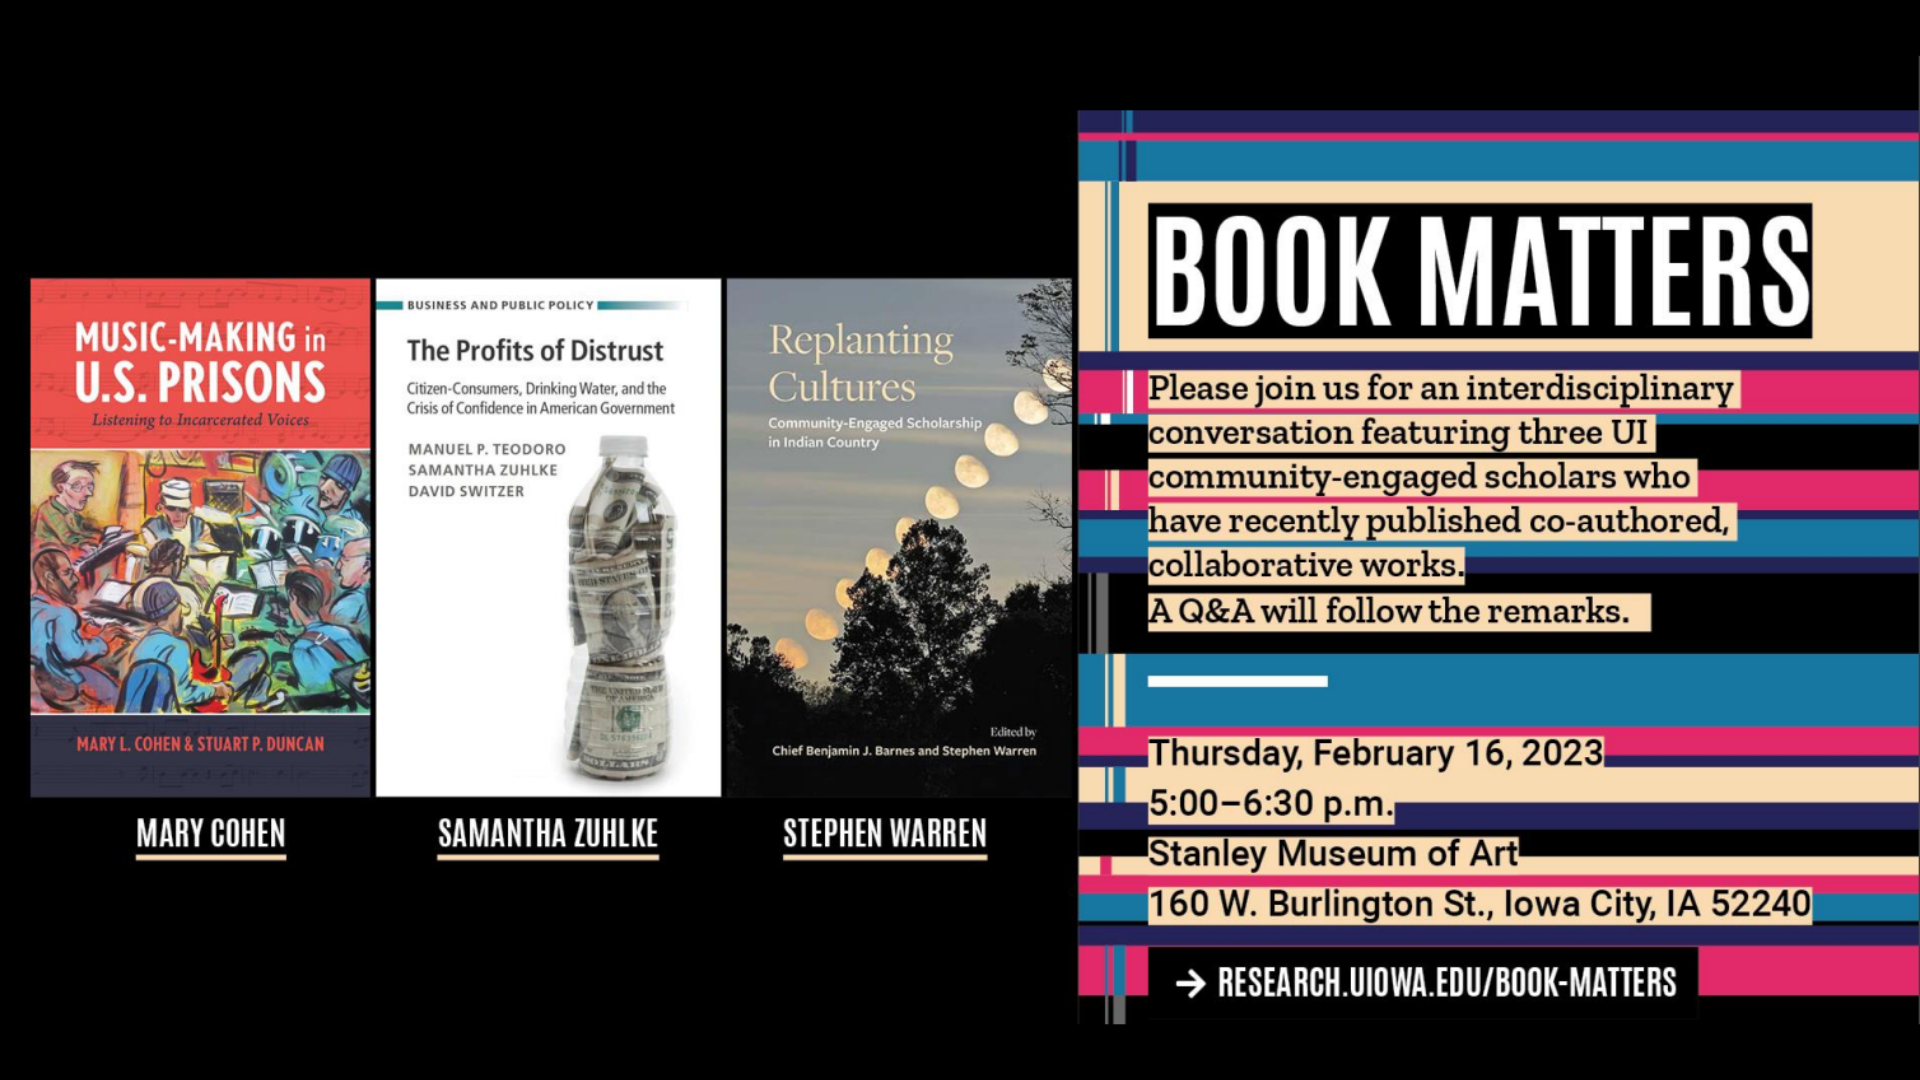 Please join us for an interdisciplinary conversation featuring three UI community-engaged scholars who have recently published co-authored, collaborative works.    A Q&A will follow the remarks.        Thursday, February 16, 2023    5:00 - 6:30 p.m.    Stanley Museum of Art    160 W. Burlington St., Iowa City, IA 52240